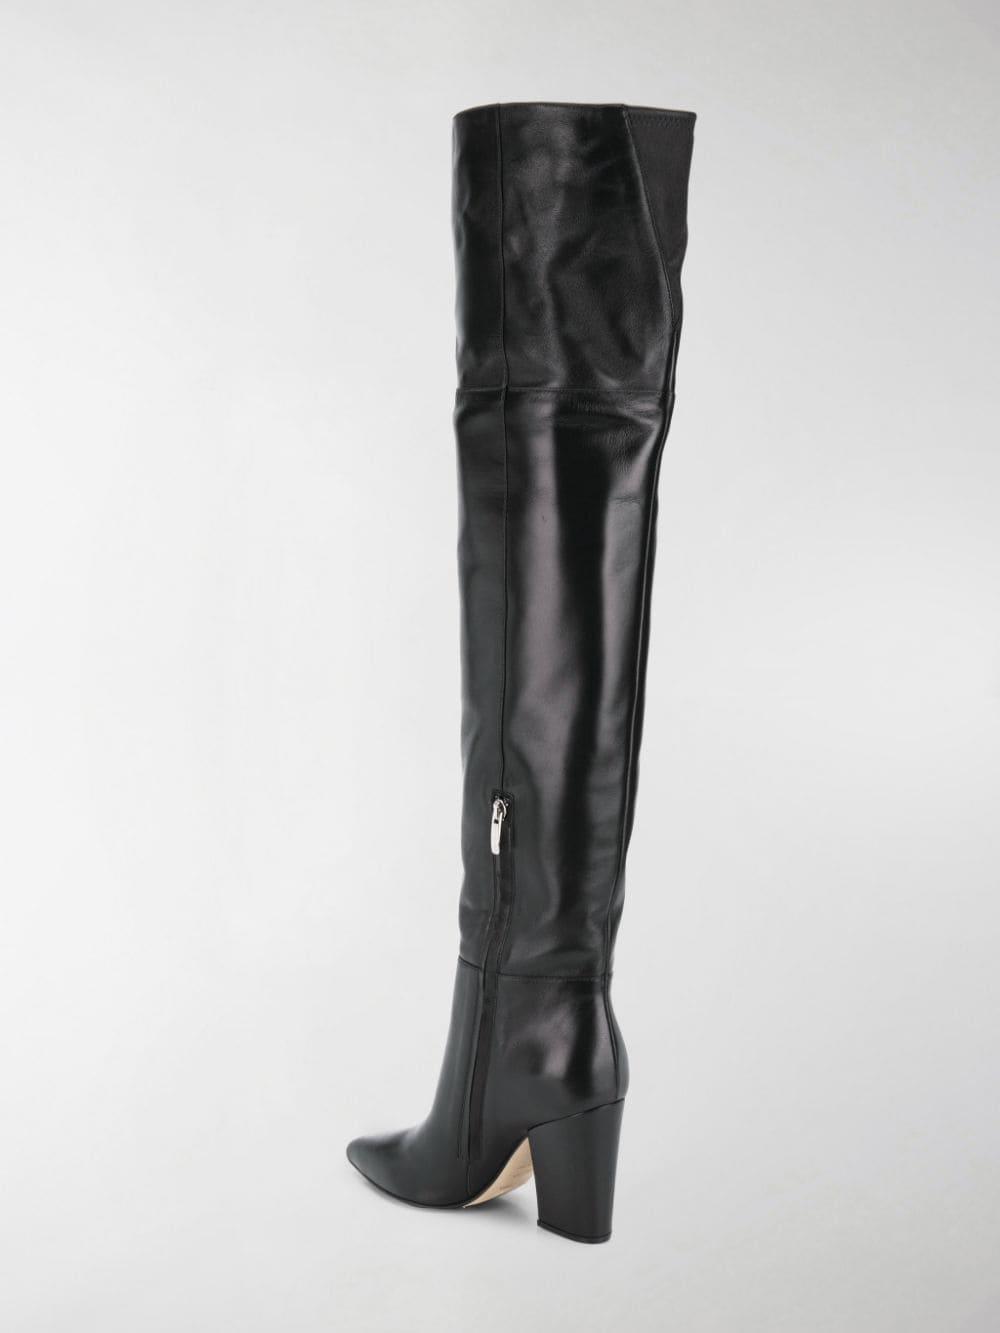 Sergio Rossi Leather Over The Knee Boots in Black - Lyst